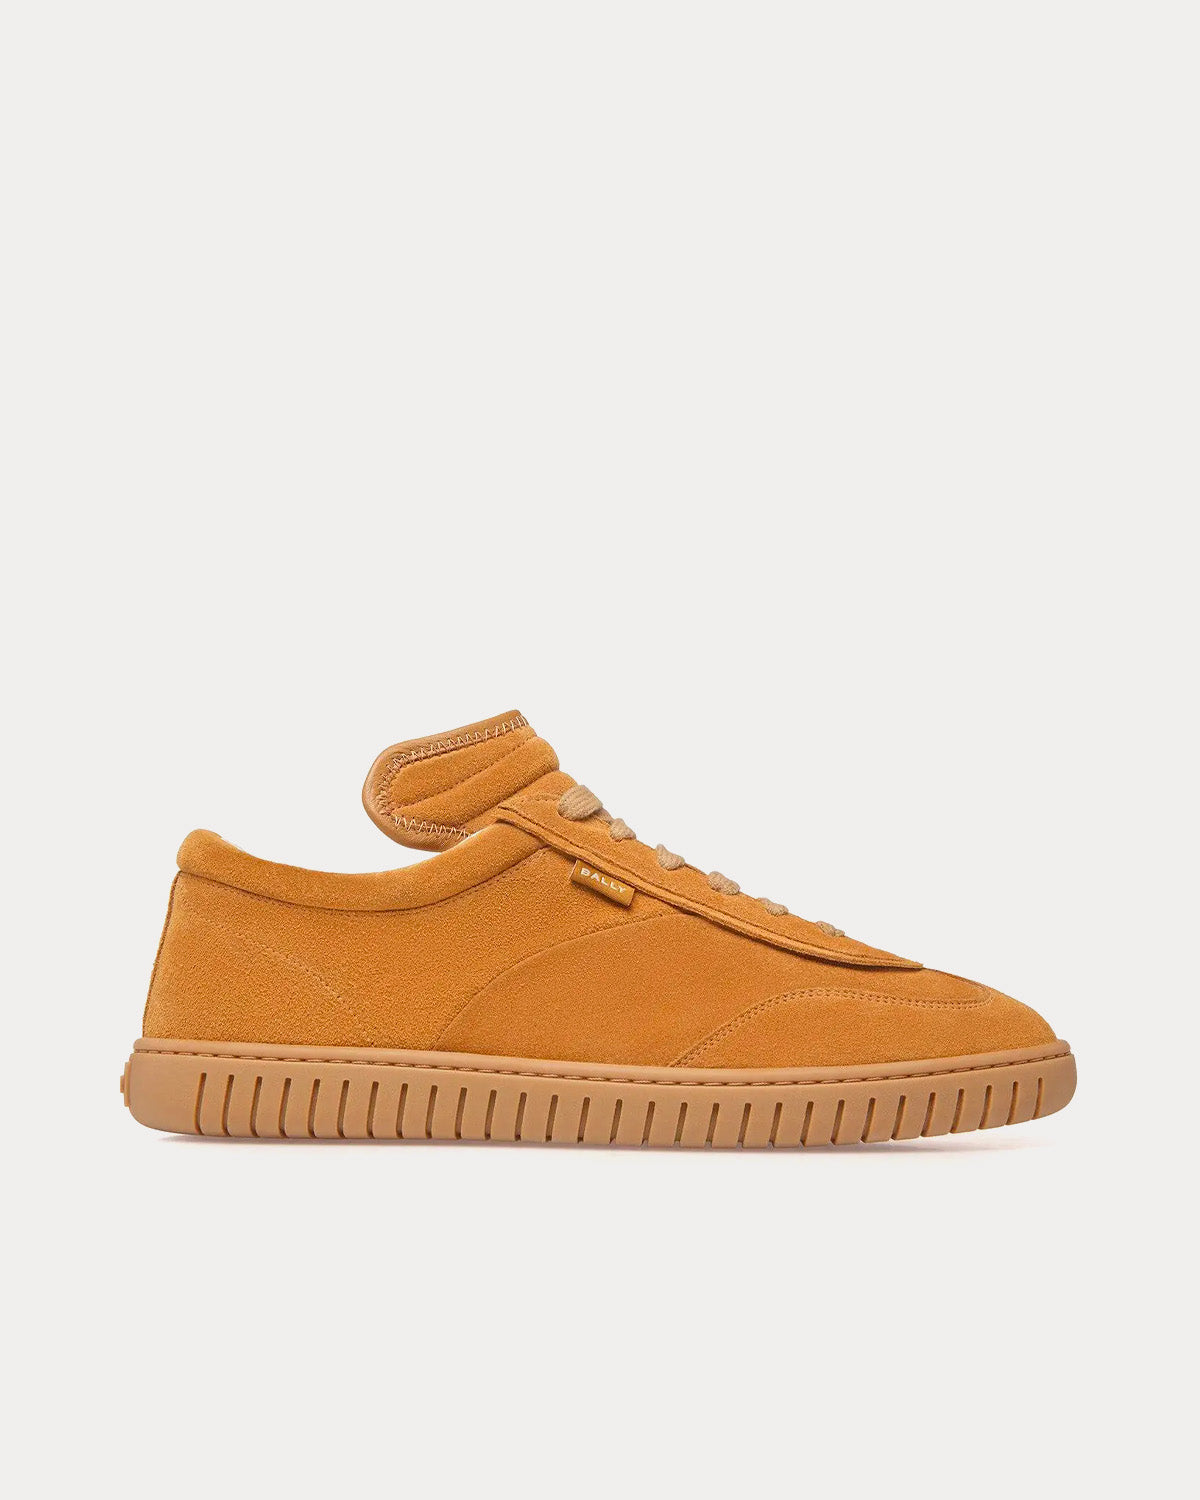 Bally - Player Suede Desert / Amber Low Top Sneakers